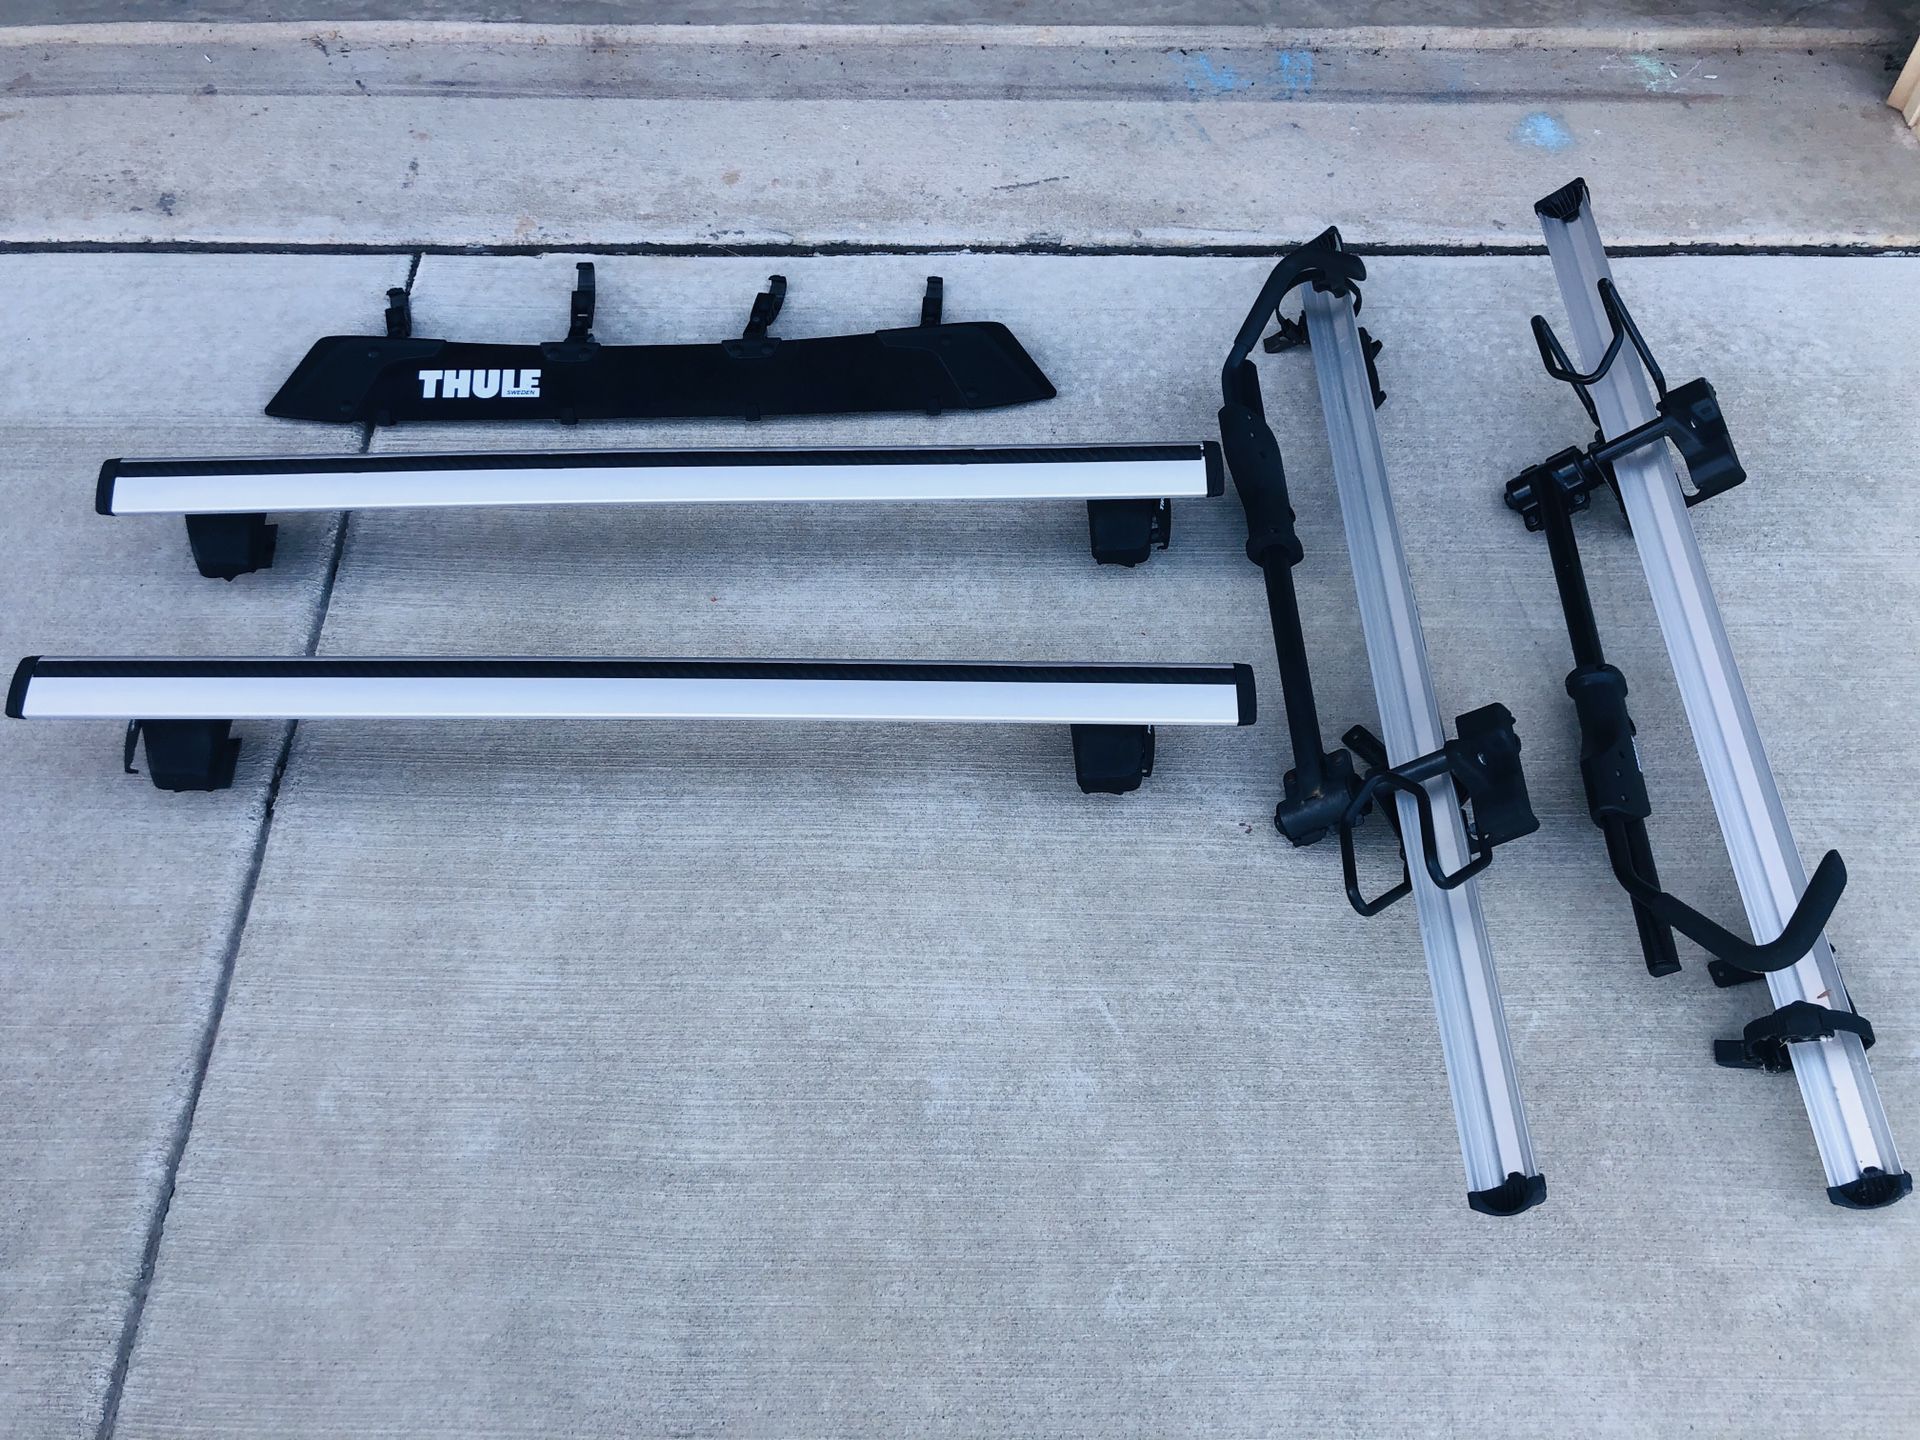 Thule full set of roof rack and 2 bike carriers